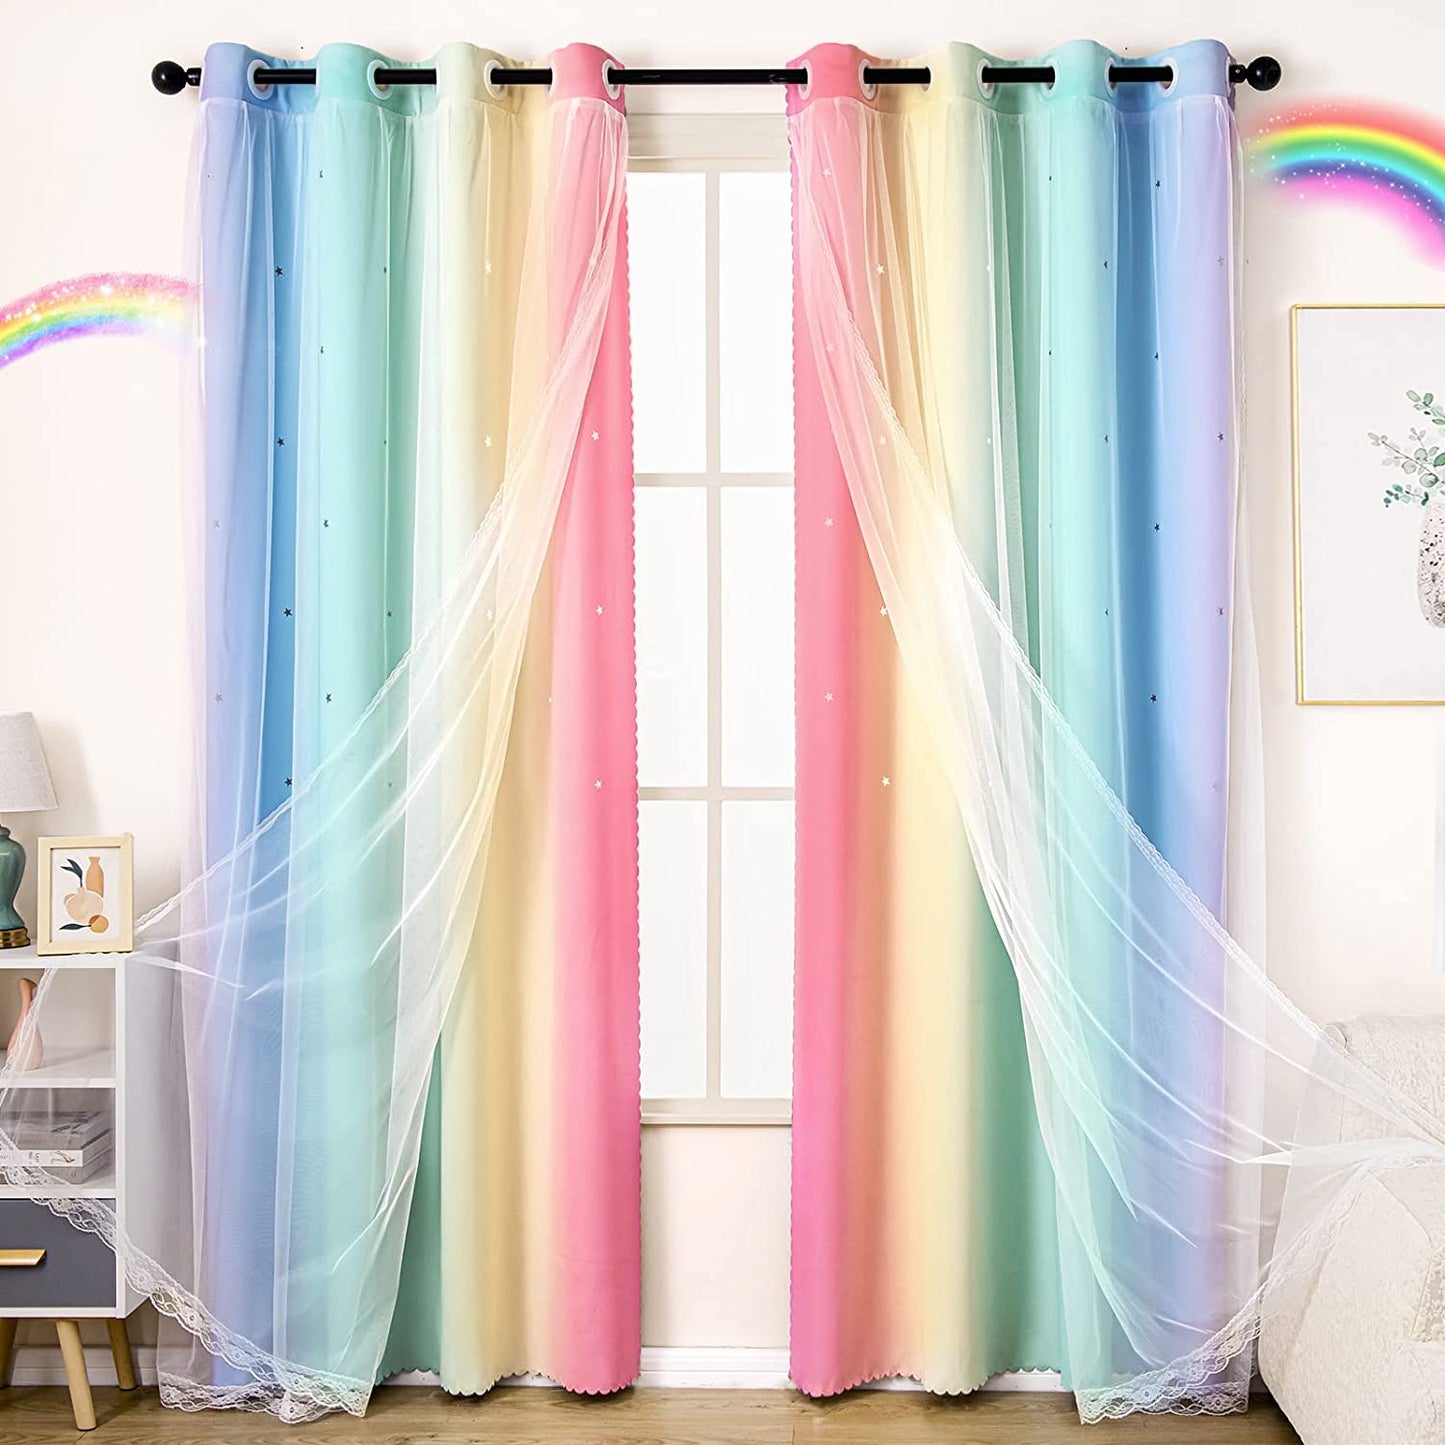 UNISTAR 2 Panels Stars Blackout Curtains for Bedroom Girls Kids Baby Window Decoration Double Layer Star Cut Out Aesthetic Living Room Decor Wall Home Curtain,W52 X L63 Inches,Pink  UNISTAR 1 Panel 丨 Rainbow 84.00" X 52.00" 